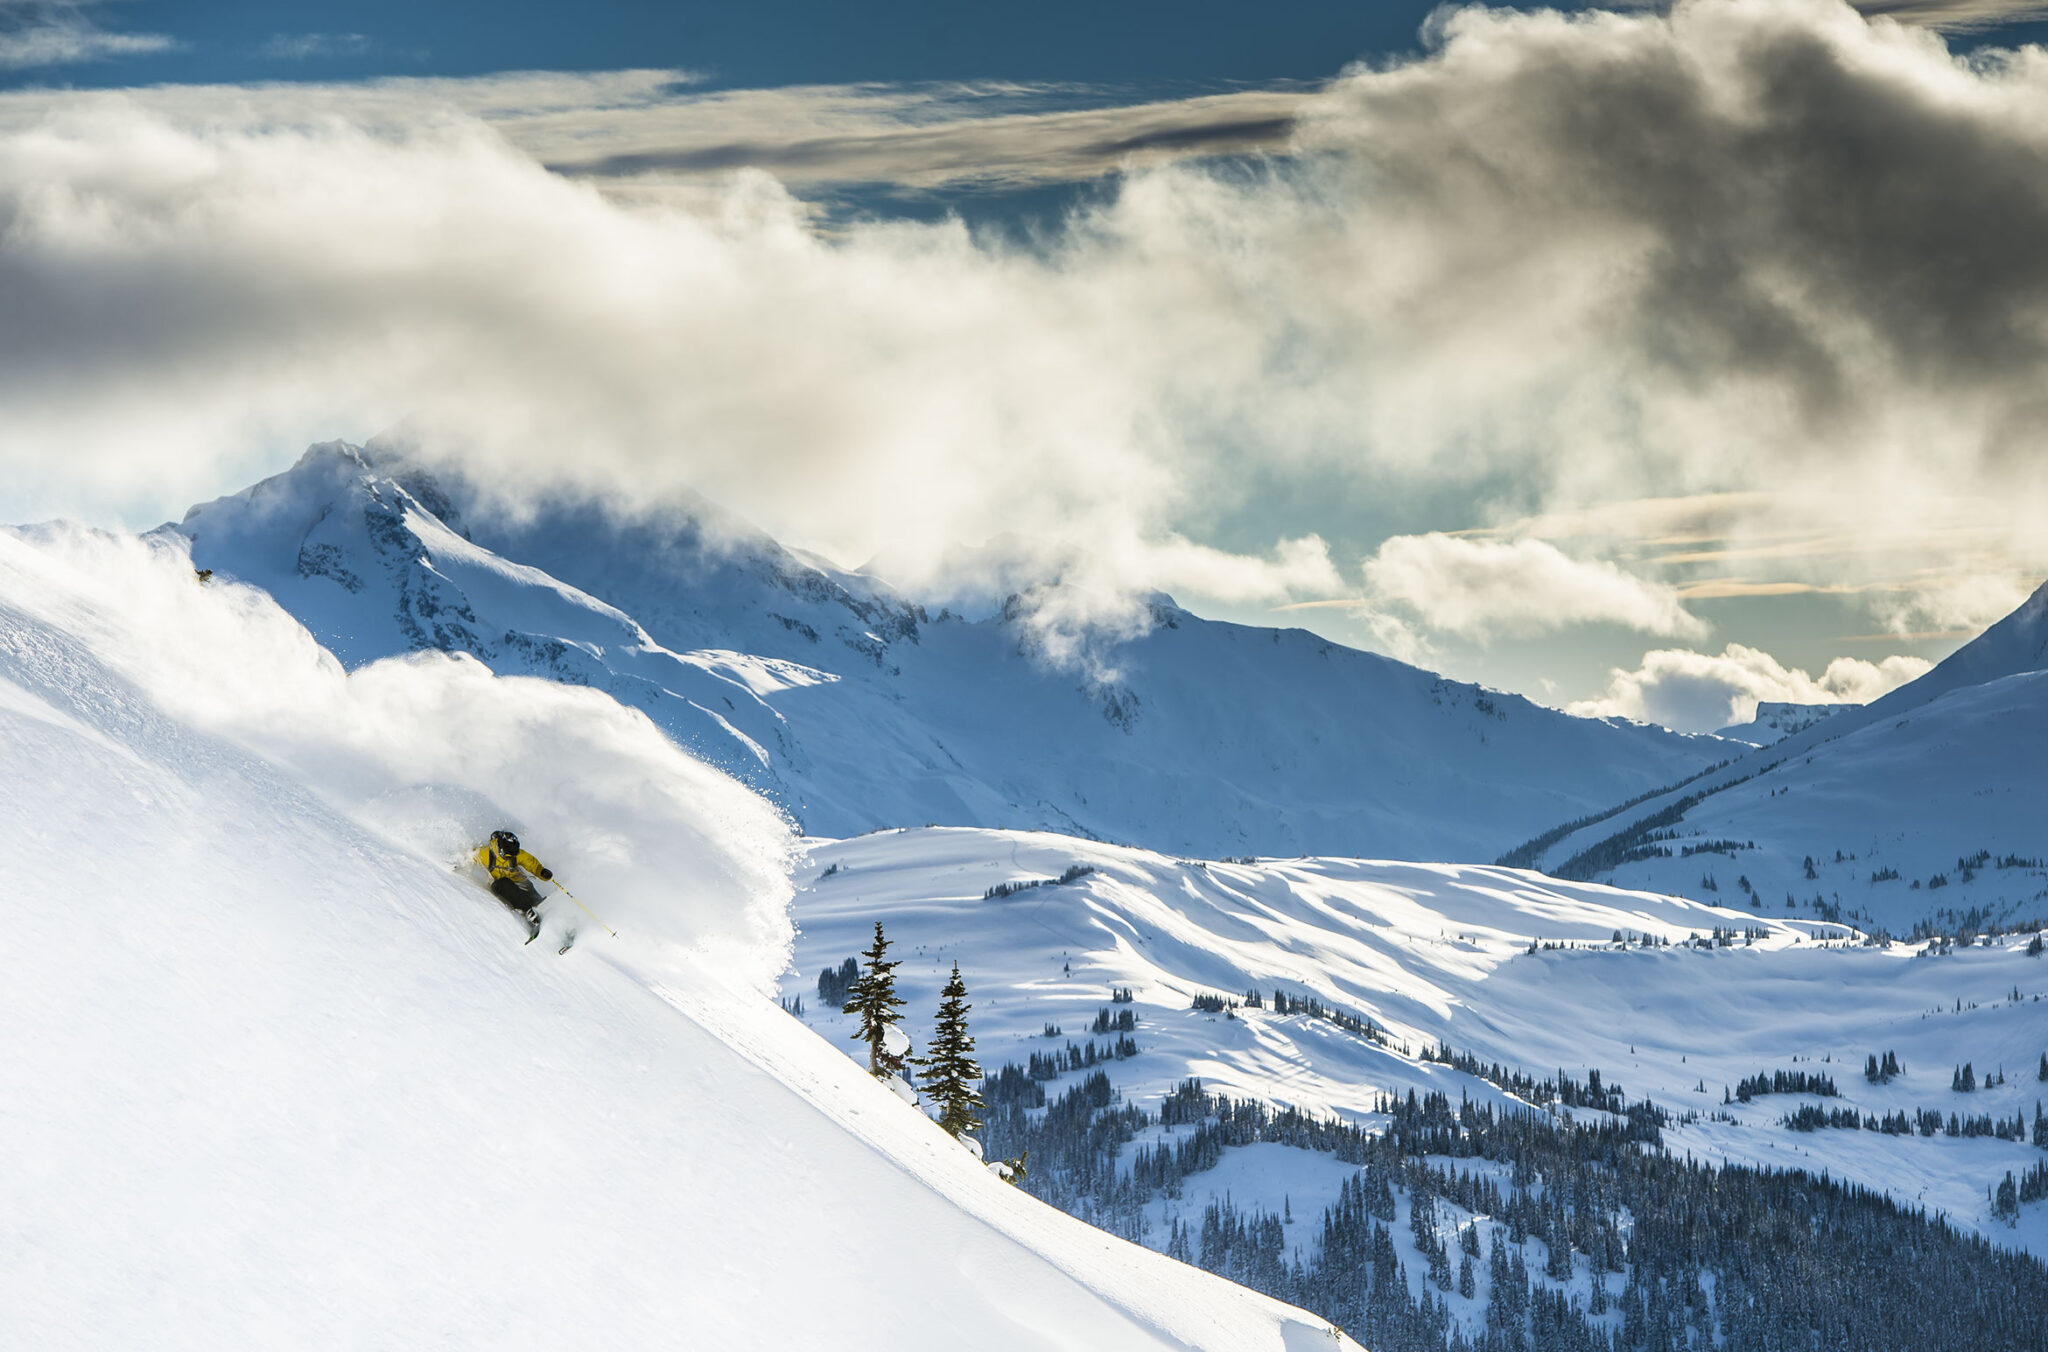 A skier rips into powder as they ride down a slope on Whistler Blackcomb.